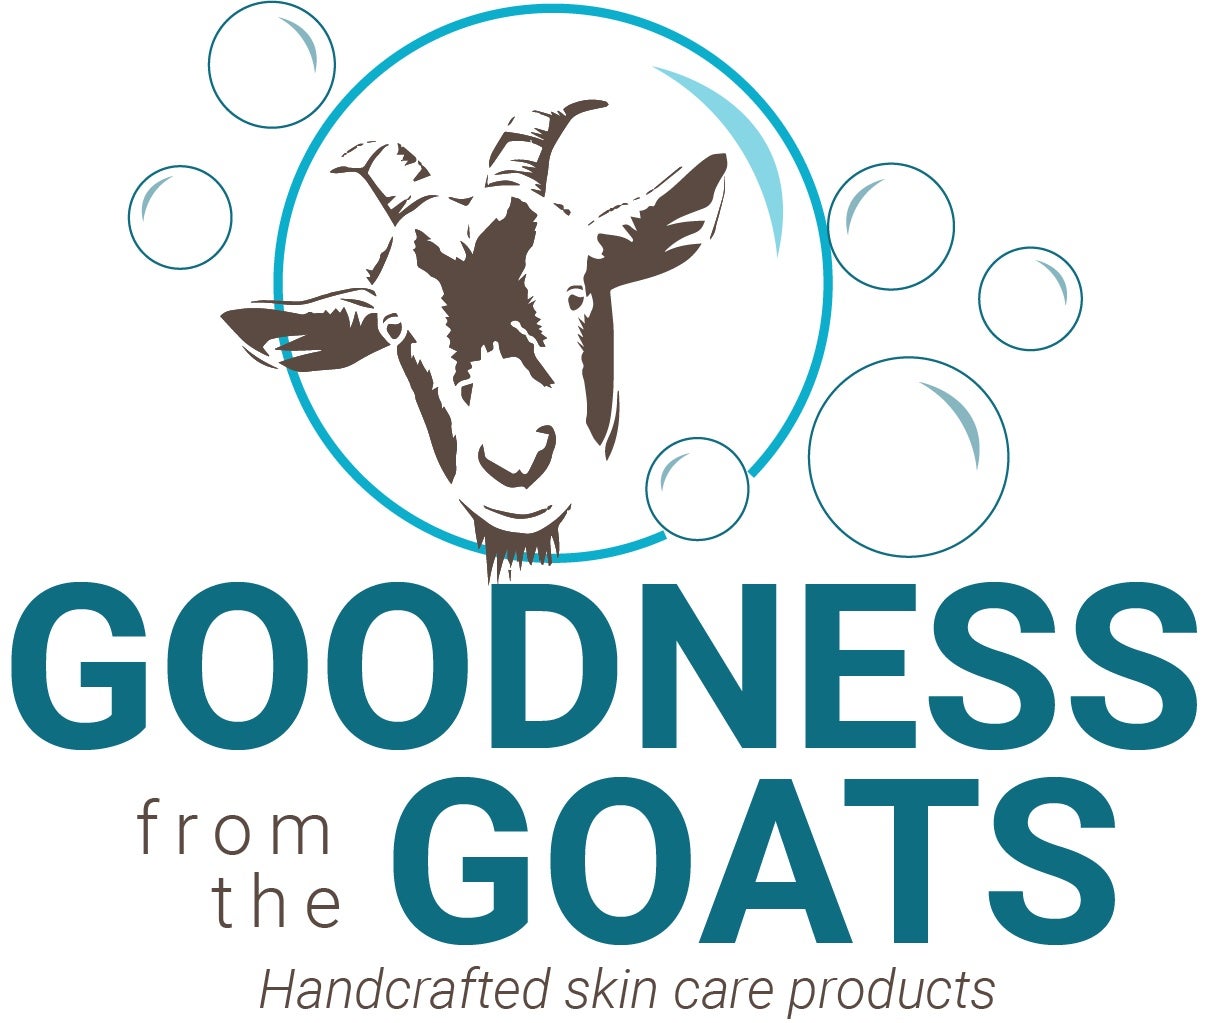 Goat's Milk Soap — Benjamin's Hope  Where People of All Abilities Live,  Learn, Play and Worship.